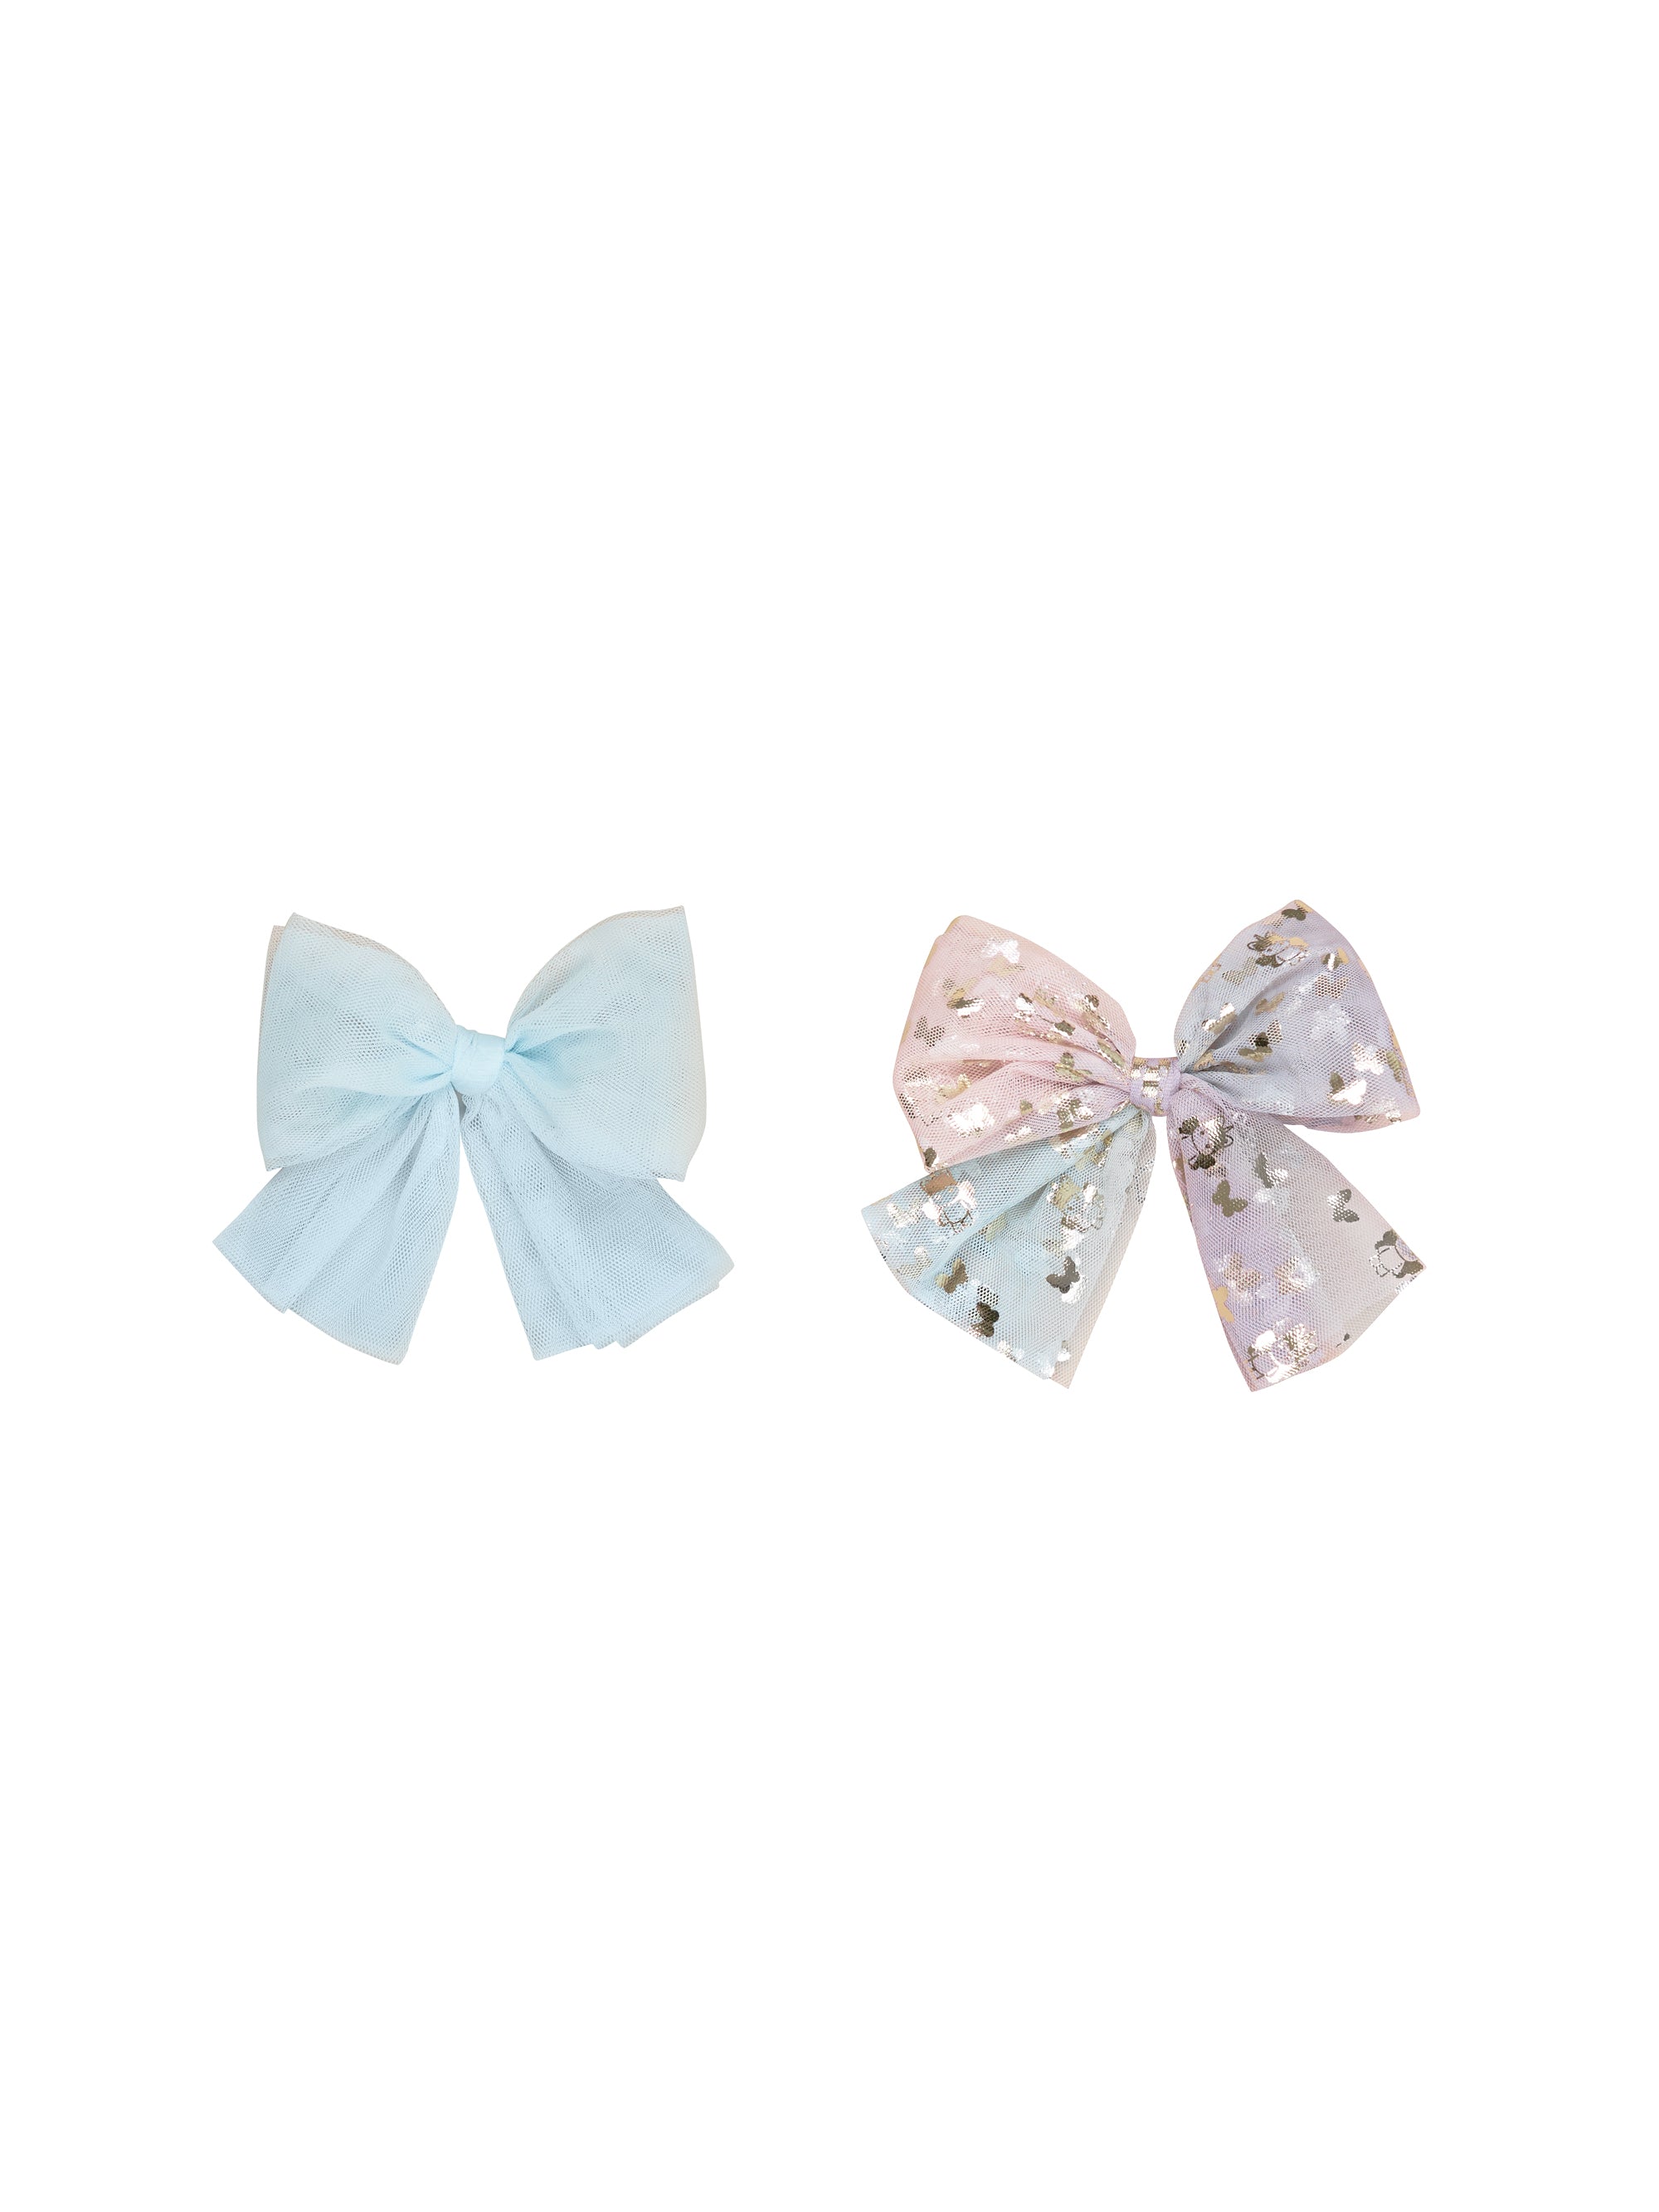 Huxbaby - One Size Butterfly Unicorn Hair Bow